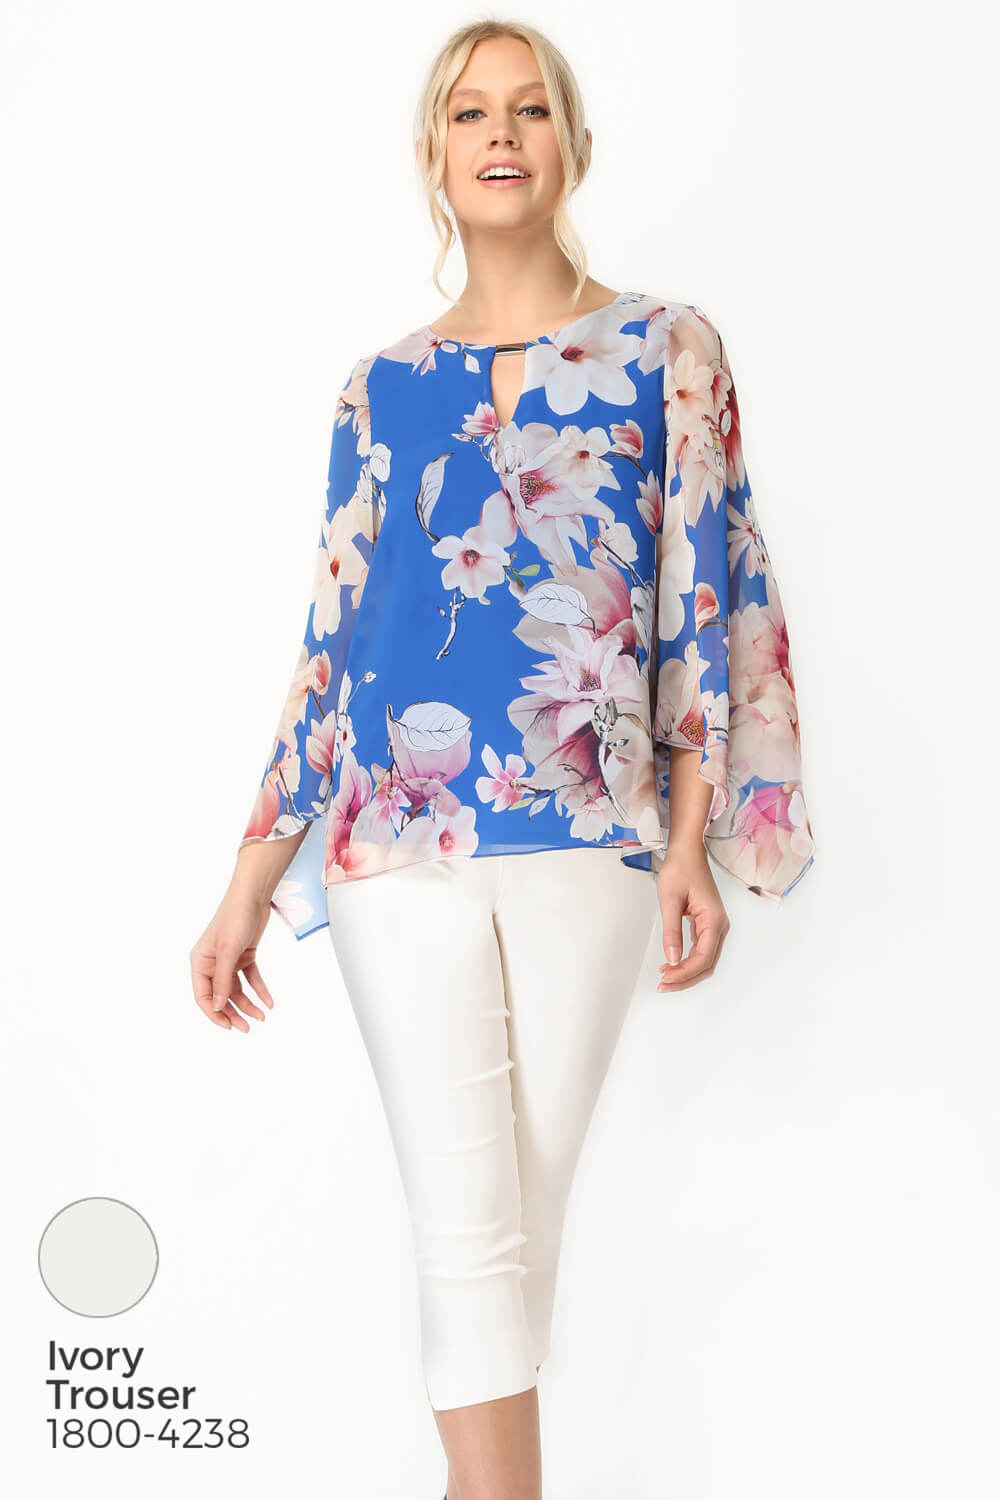 Royal Blue Floral Chiffon Overlay Top, Image 5 of 8